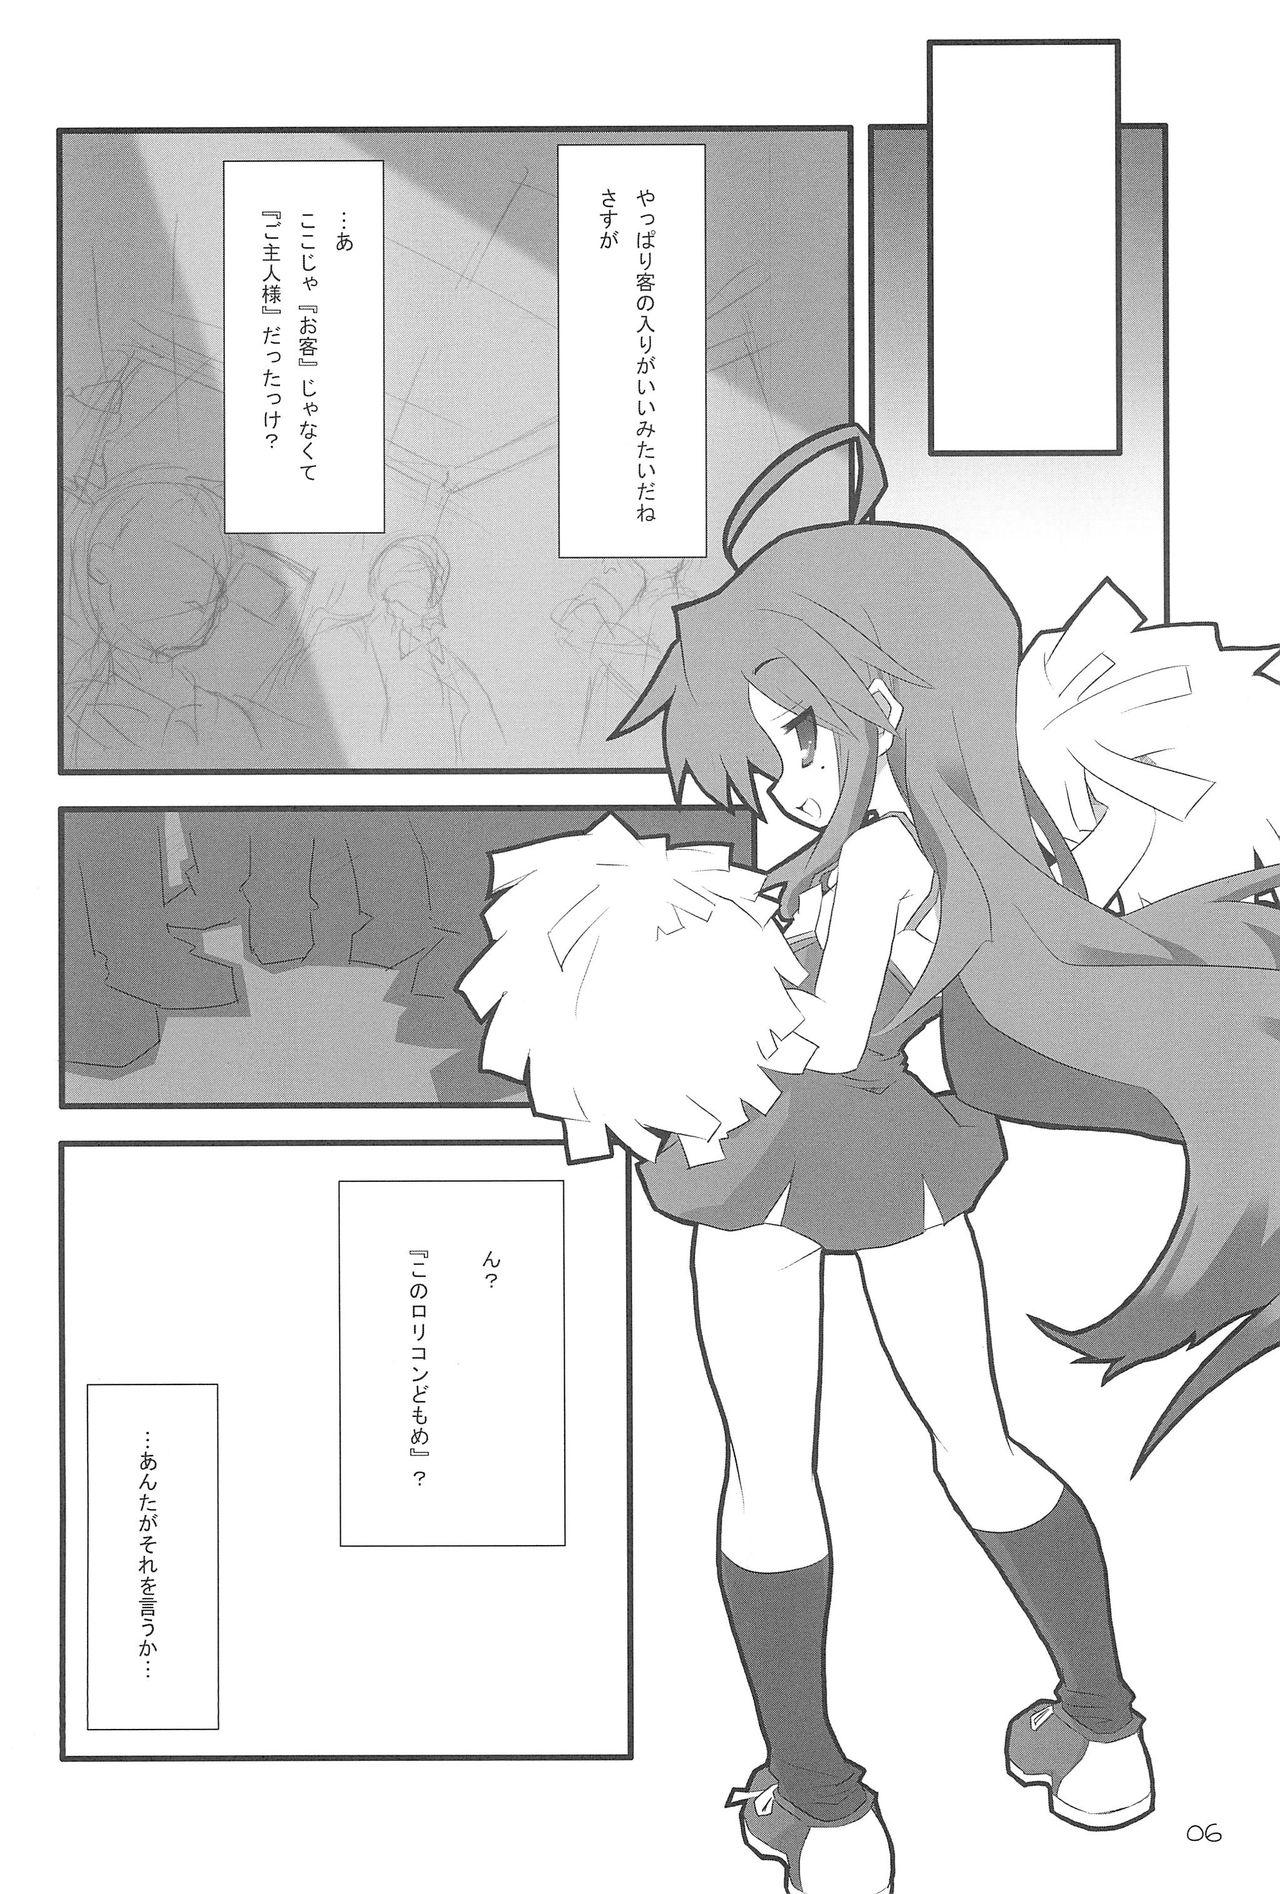 Chile LUCKY STRIKE! - Lucky star Magrinha - Page 6